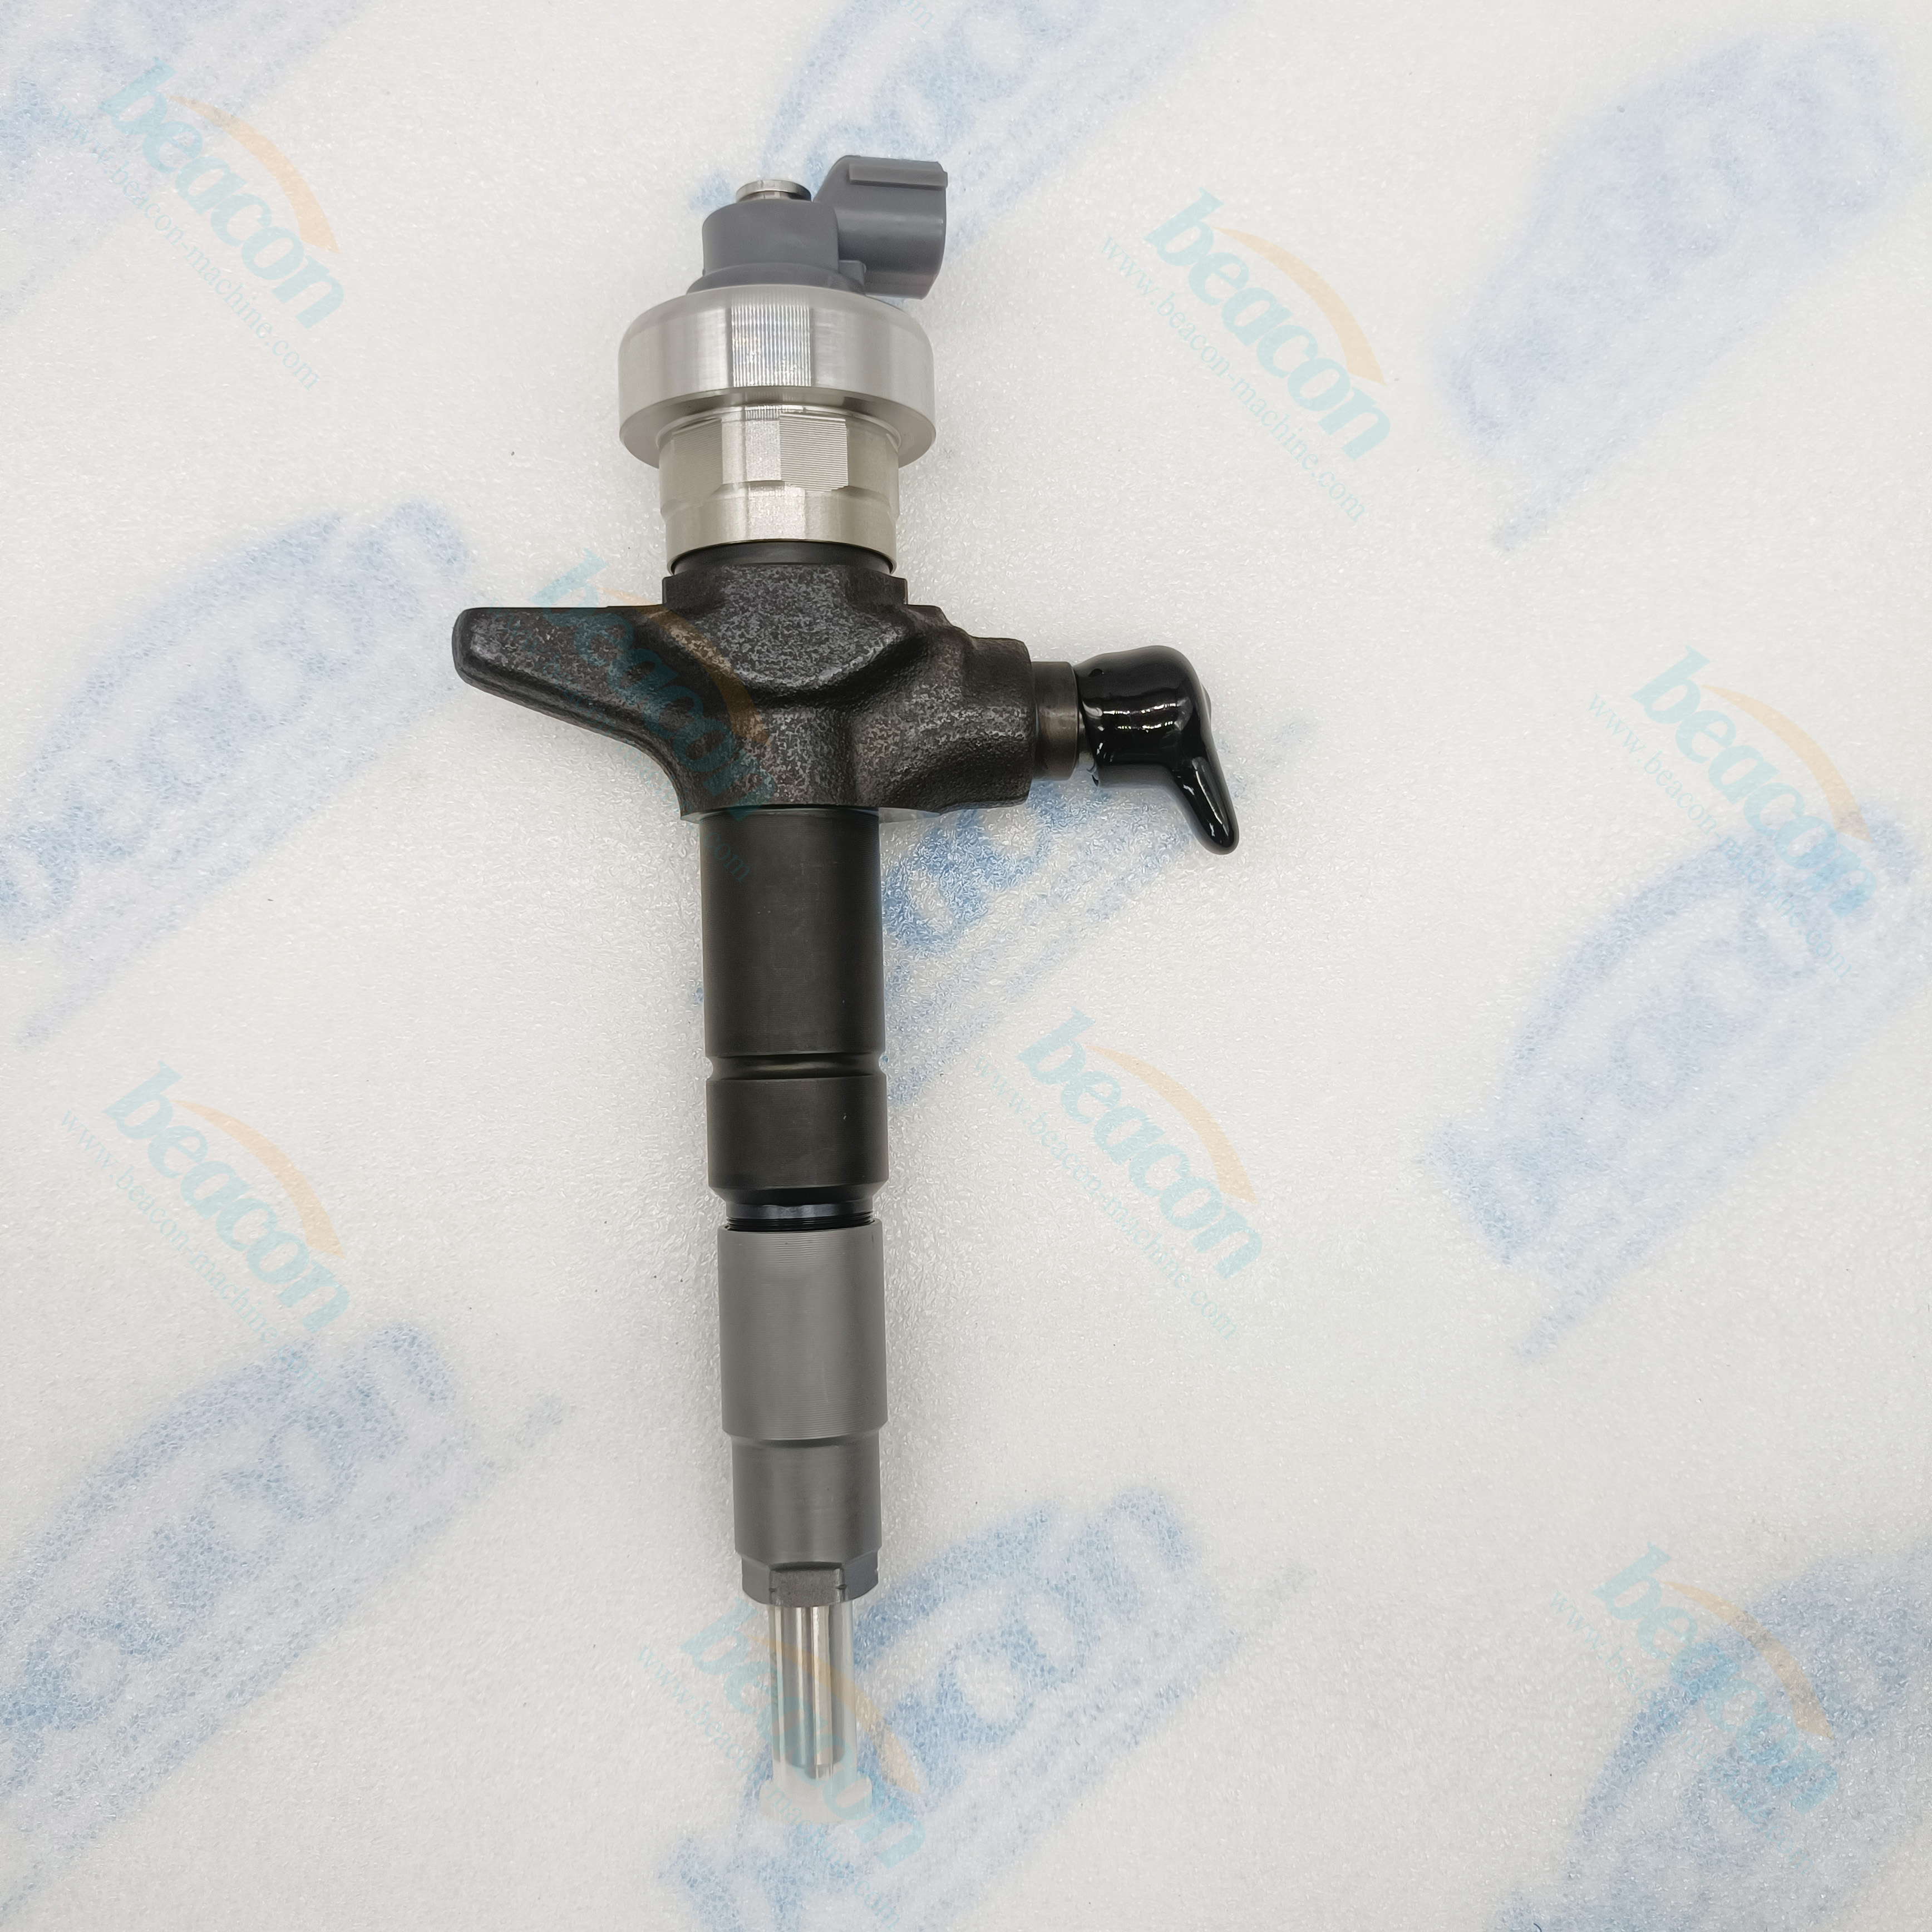  Common Rail Diesel Fuel Injector 095000-6980 8-98011604-1 8-98011604-5 Fuel Inyector Assembly 